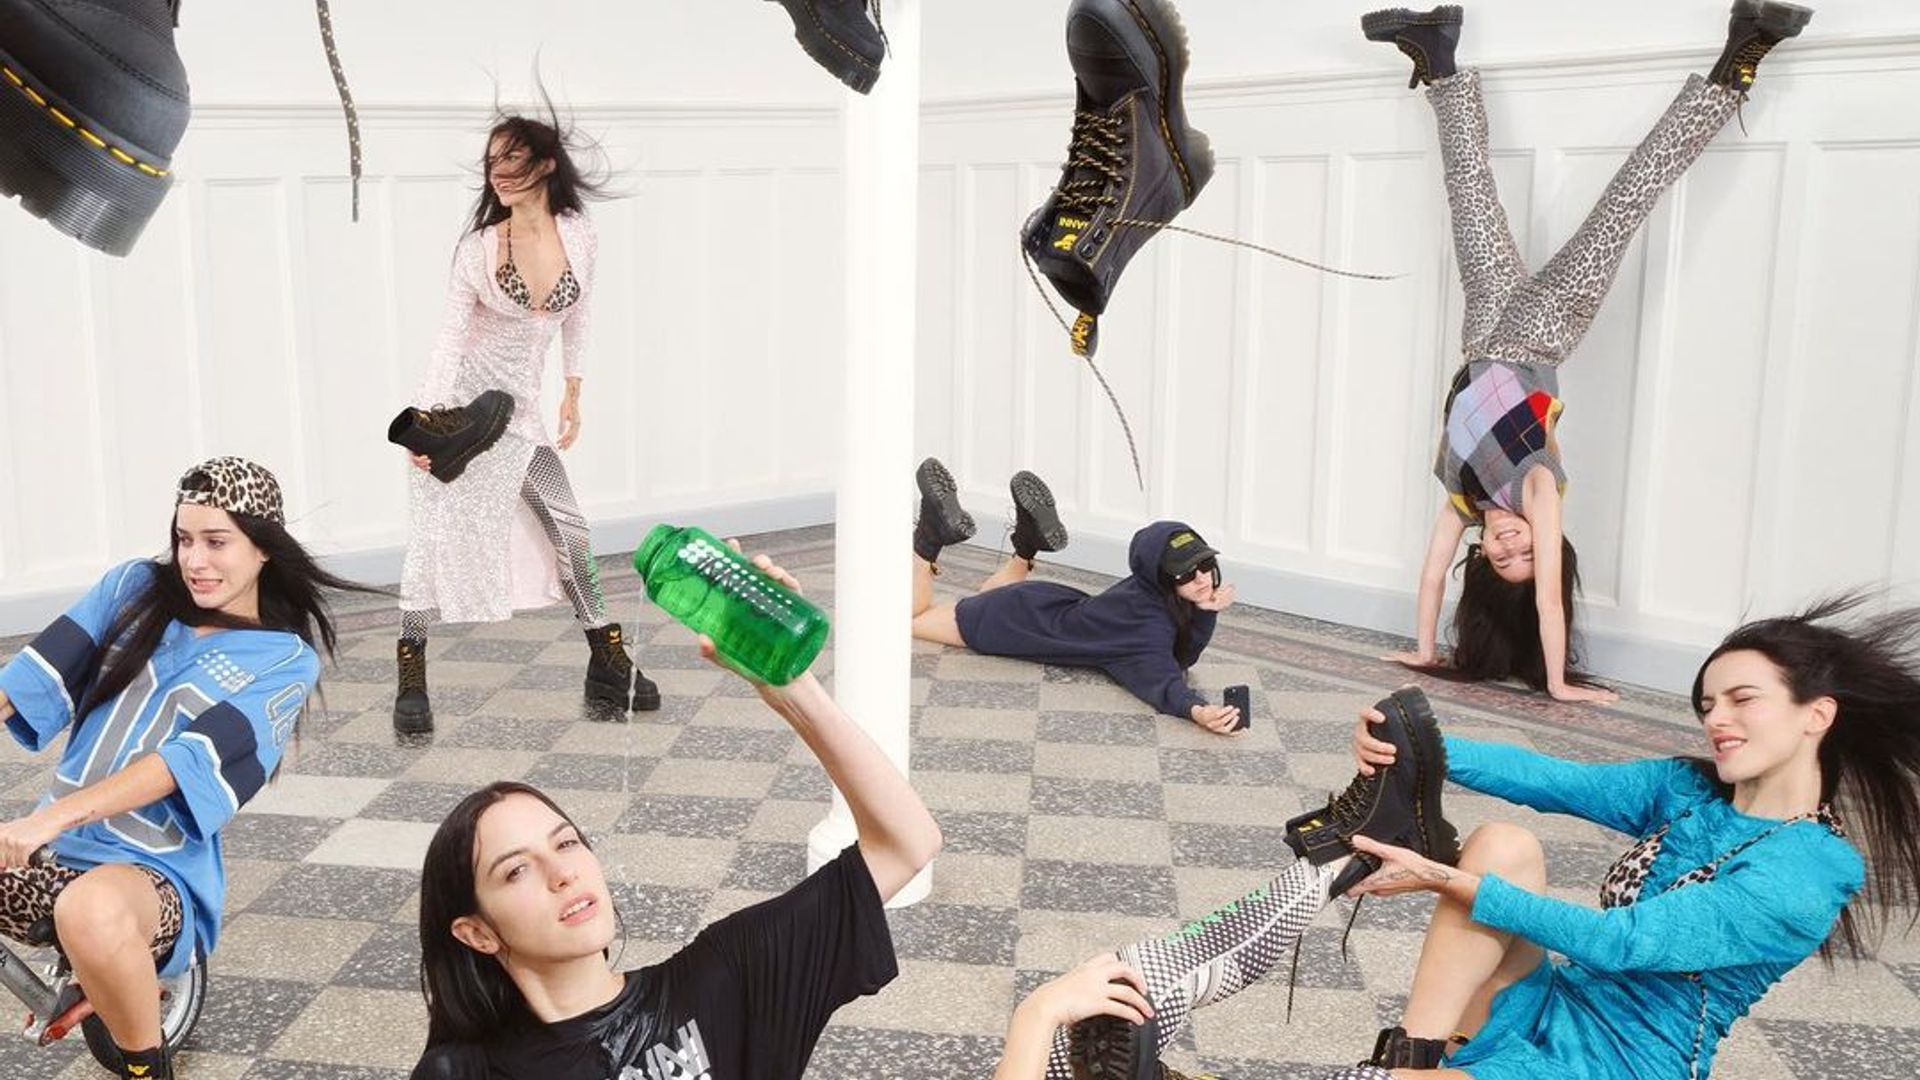 Ganni x Dr. Martens: 29 fashion collaborations that everyone is talking about